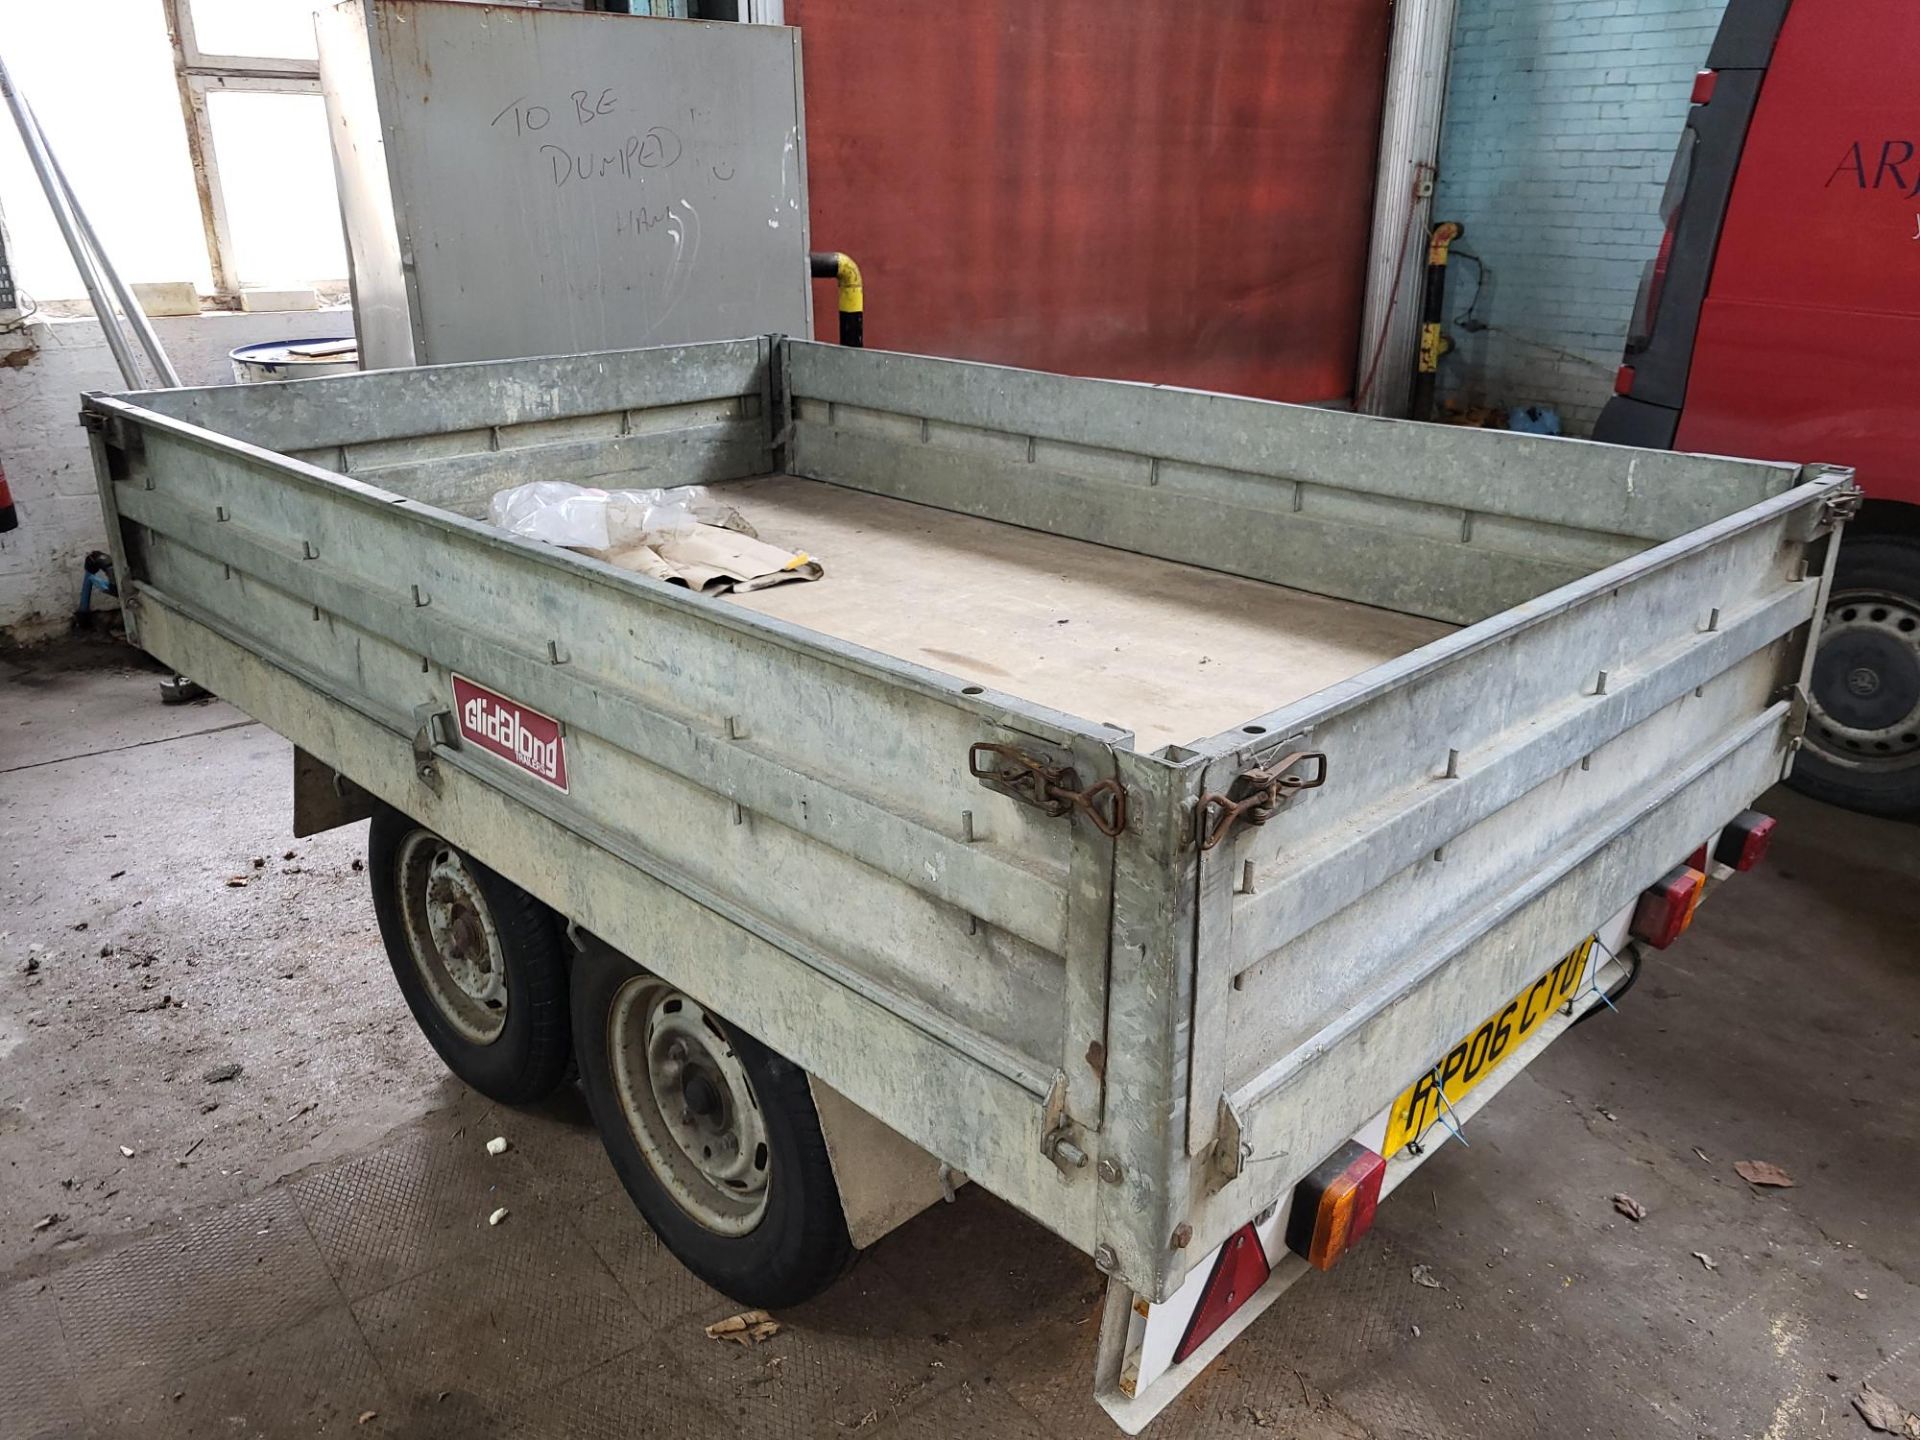 Conway Products Limited / Glidalong WM2000 1.6m x 2.5m Galvanised Steel Twin Axle Dropside Trailer - Image 5 of 6